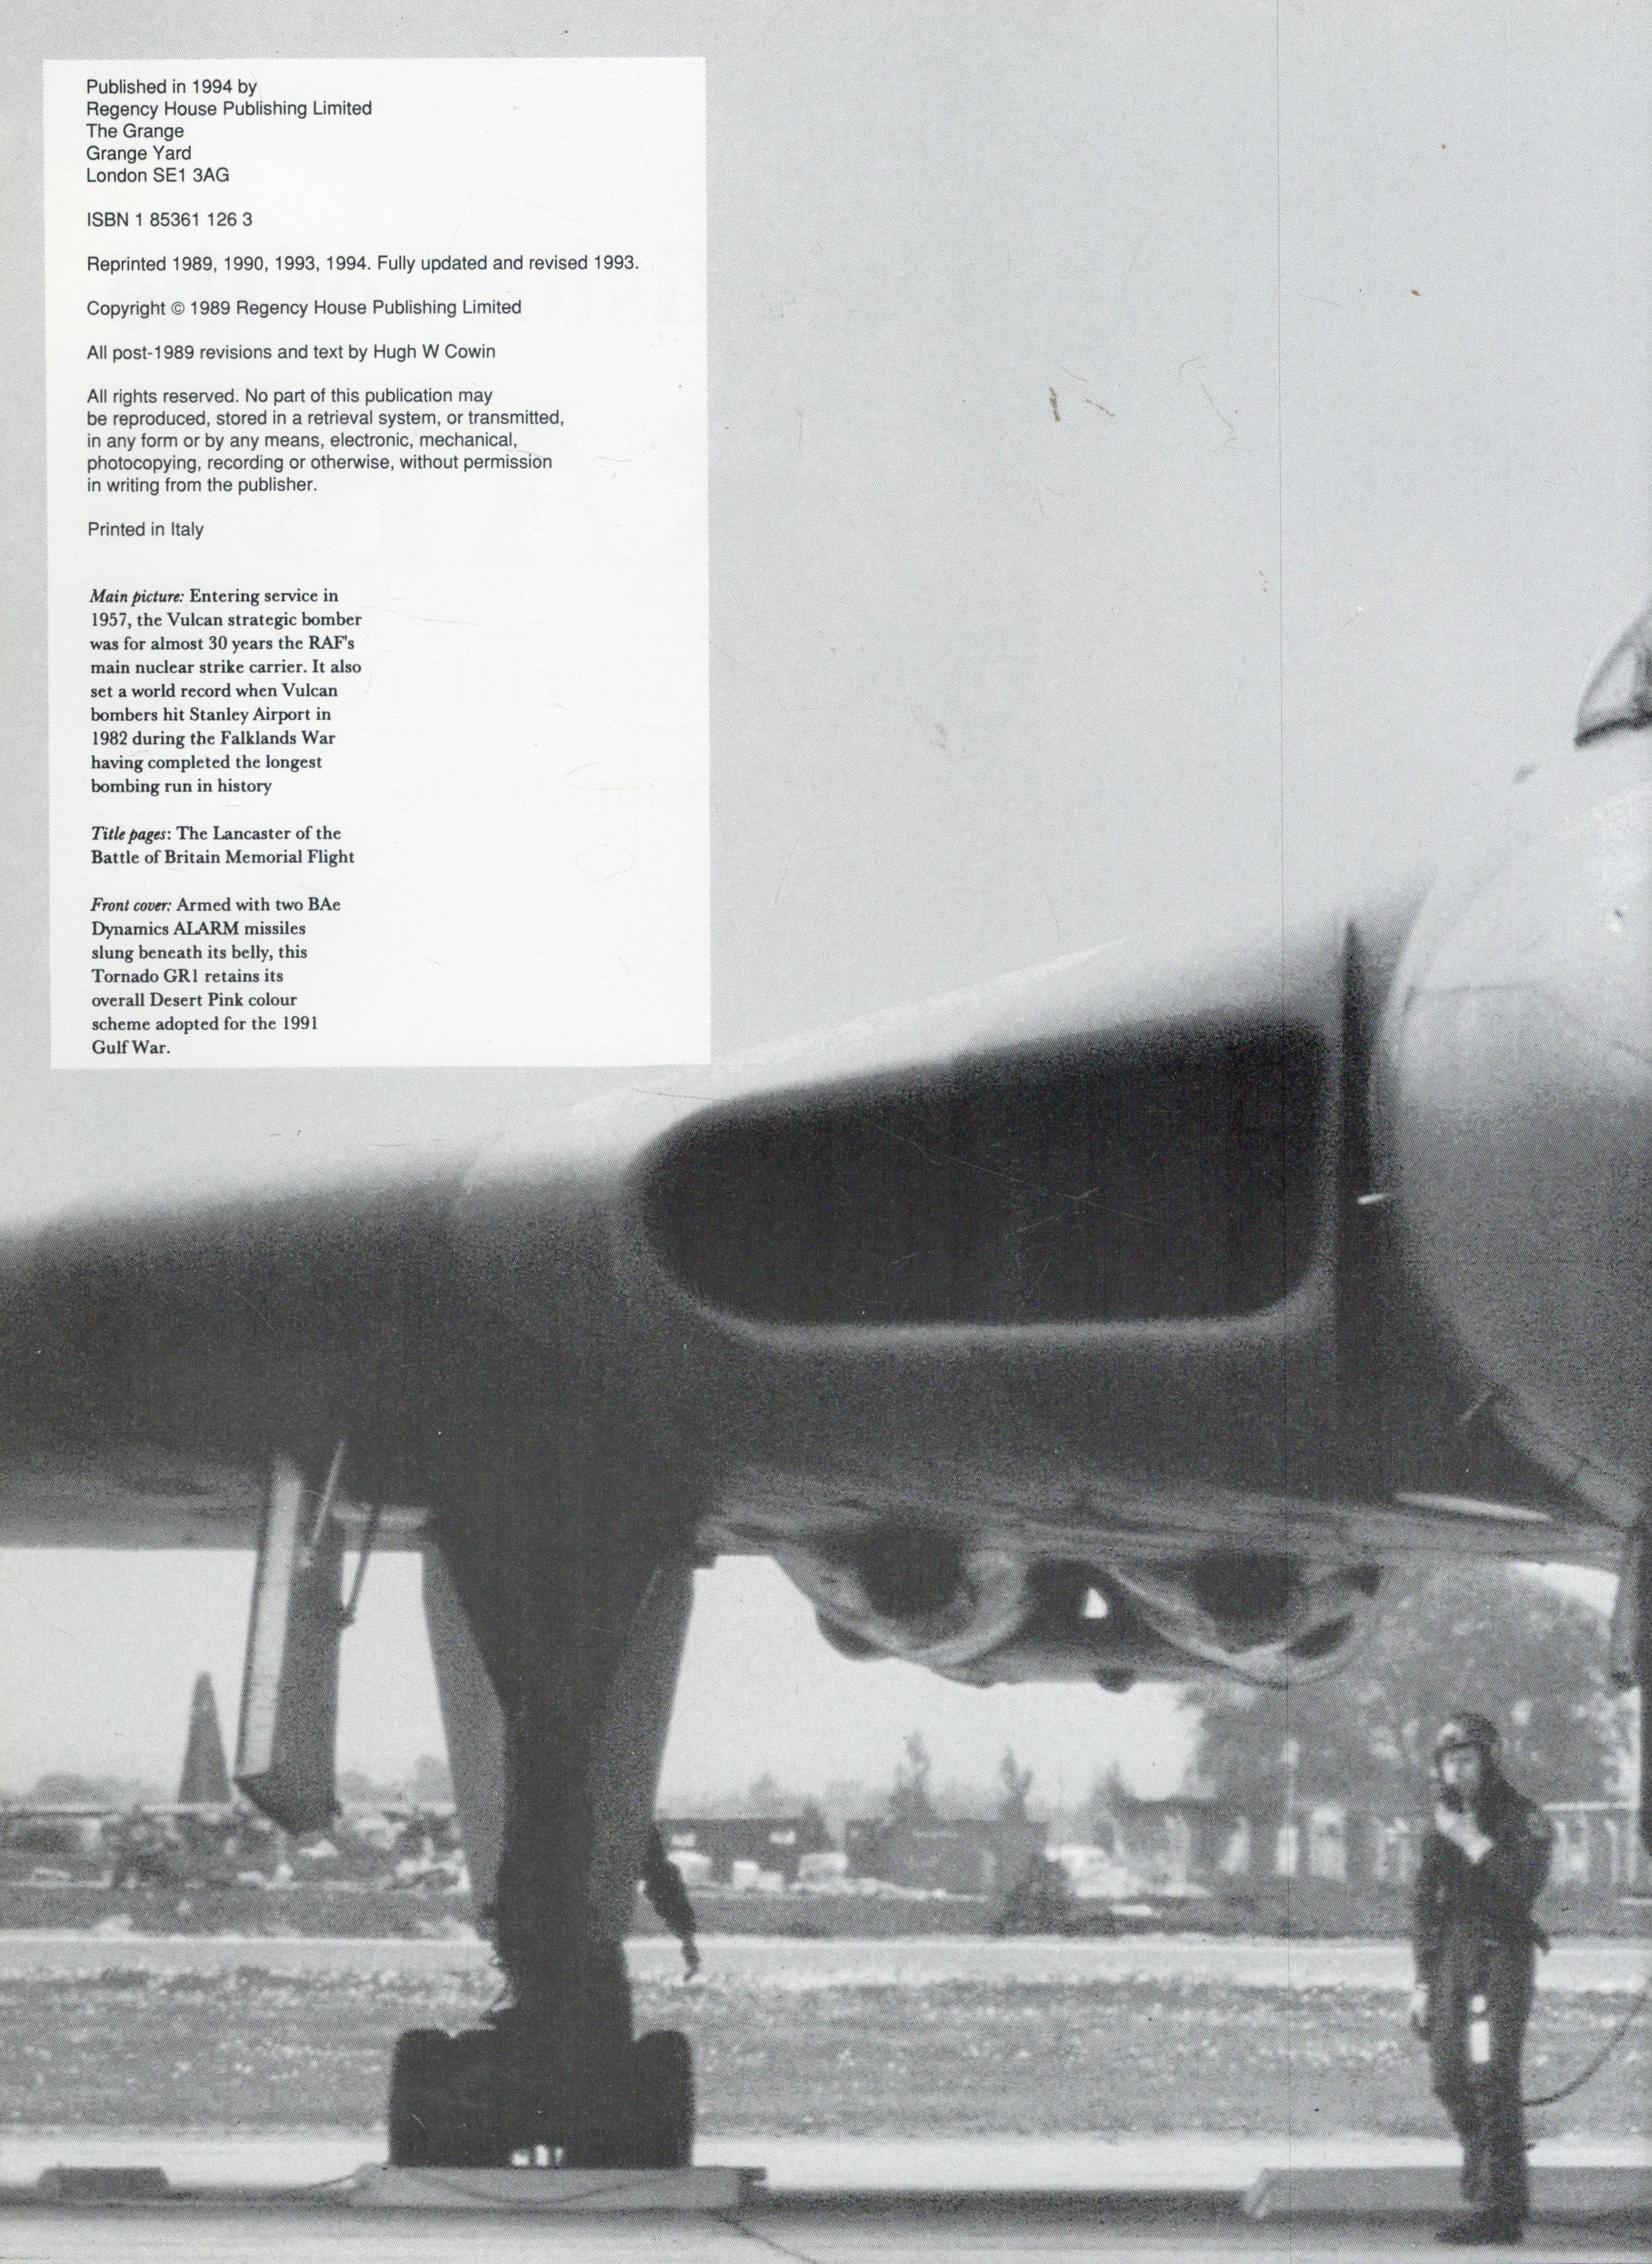 The History of The RAF by Christopher Chant Hardback Book 1994 Special Revised Edition published - Image 3 of 3